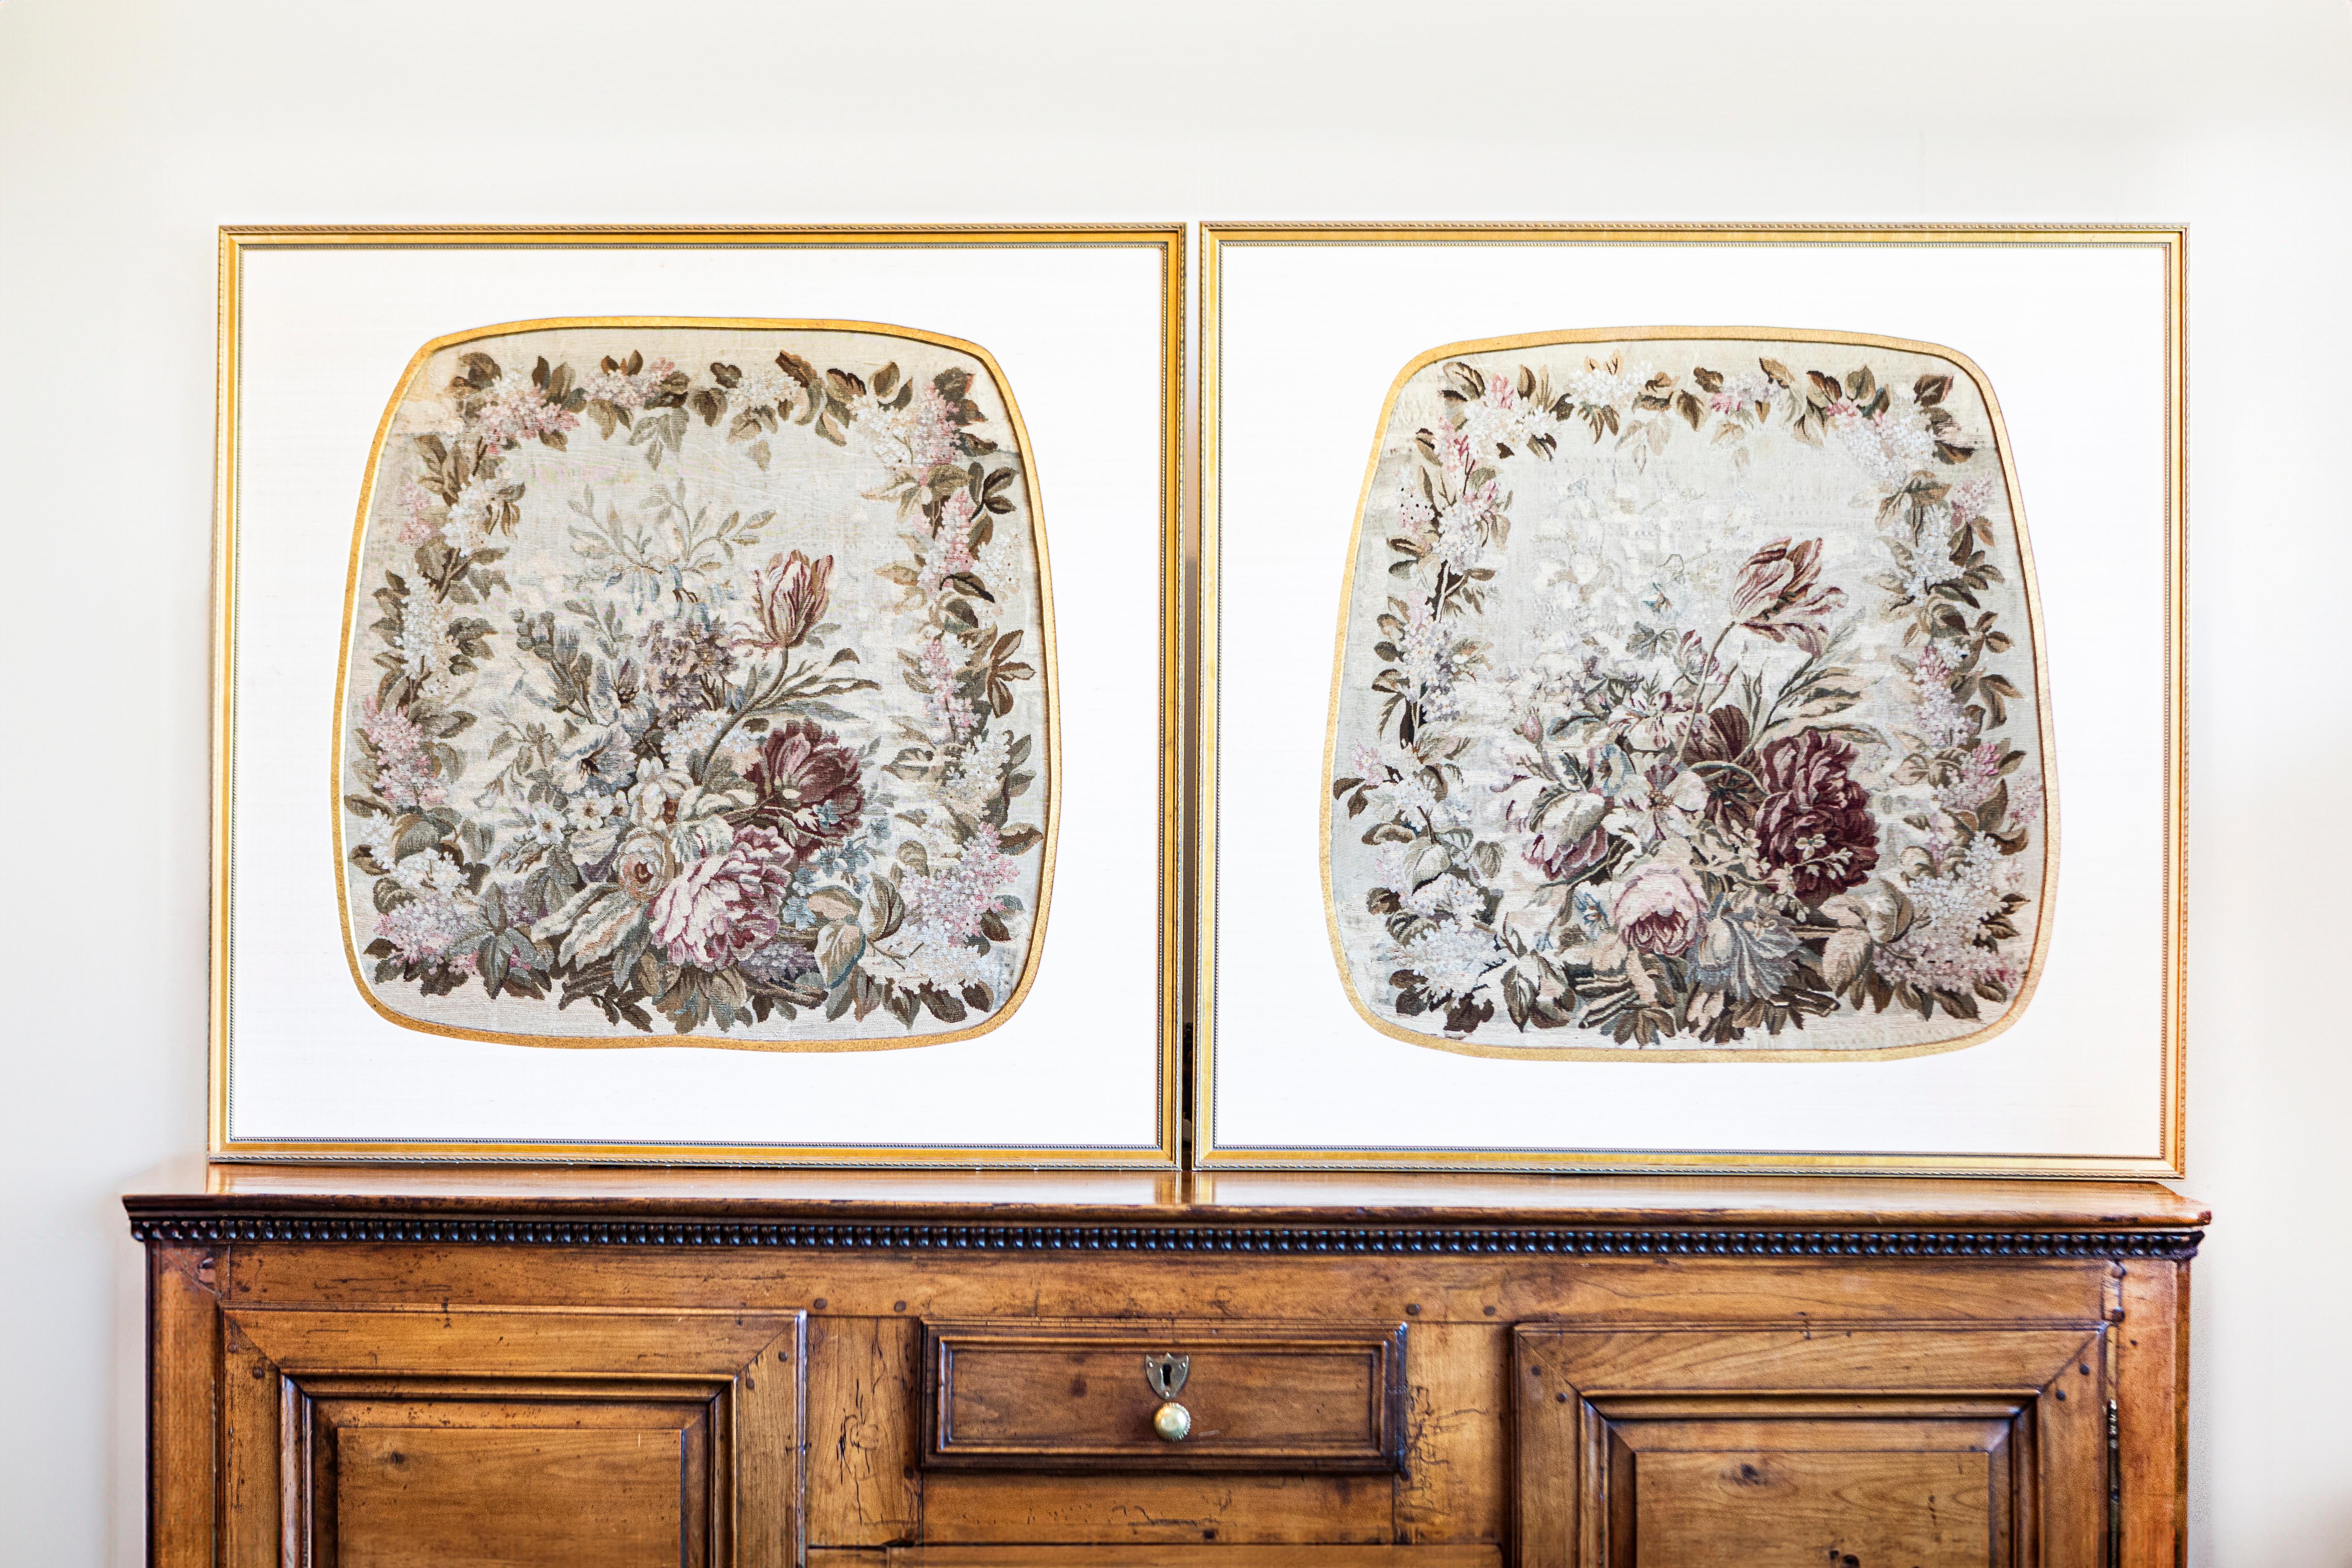 Three French silk Aubusson floral tapestries from the 19th century in carved giltwood frames, priced and sold individually. Born in the famous Aubusson Manufacture located in central France during the 19th century, each of these three lovely framed